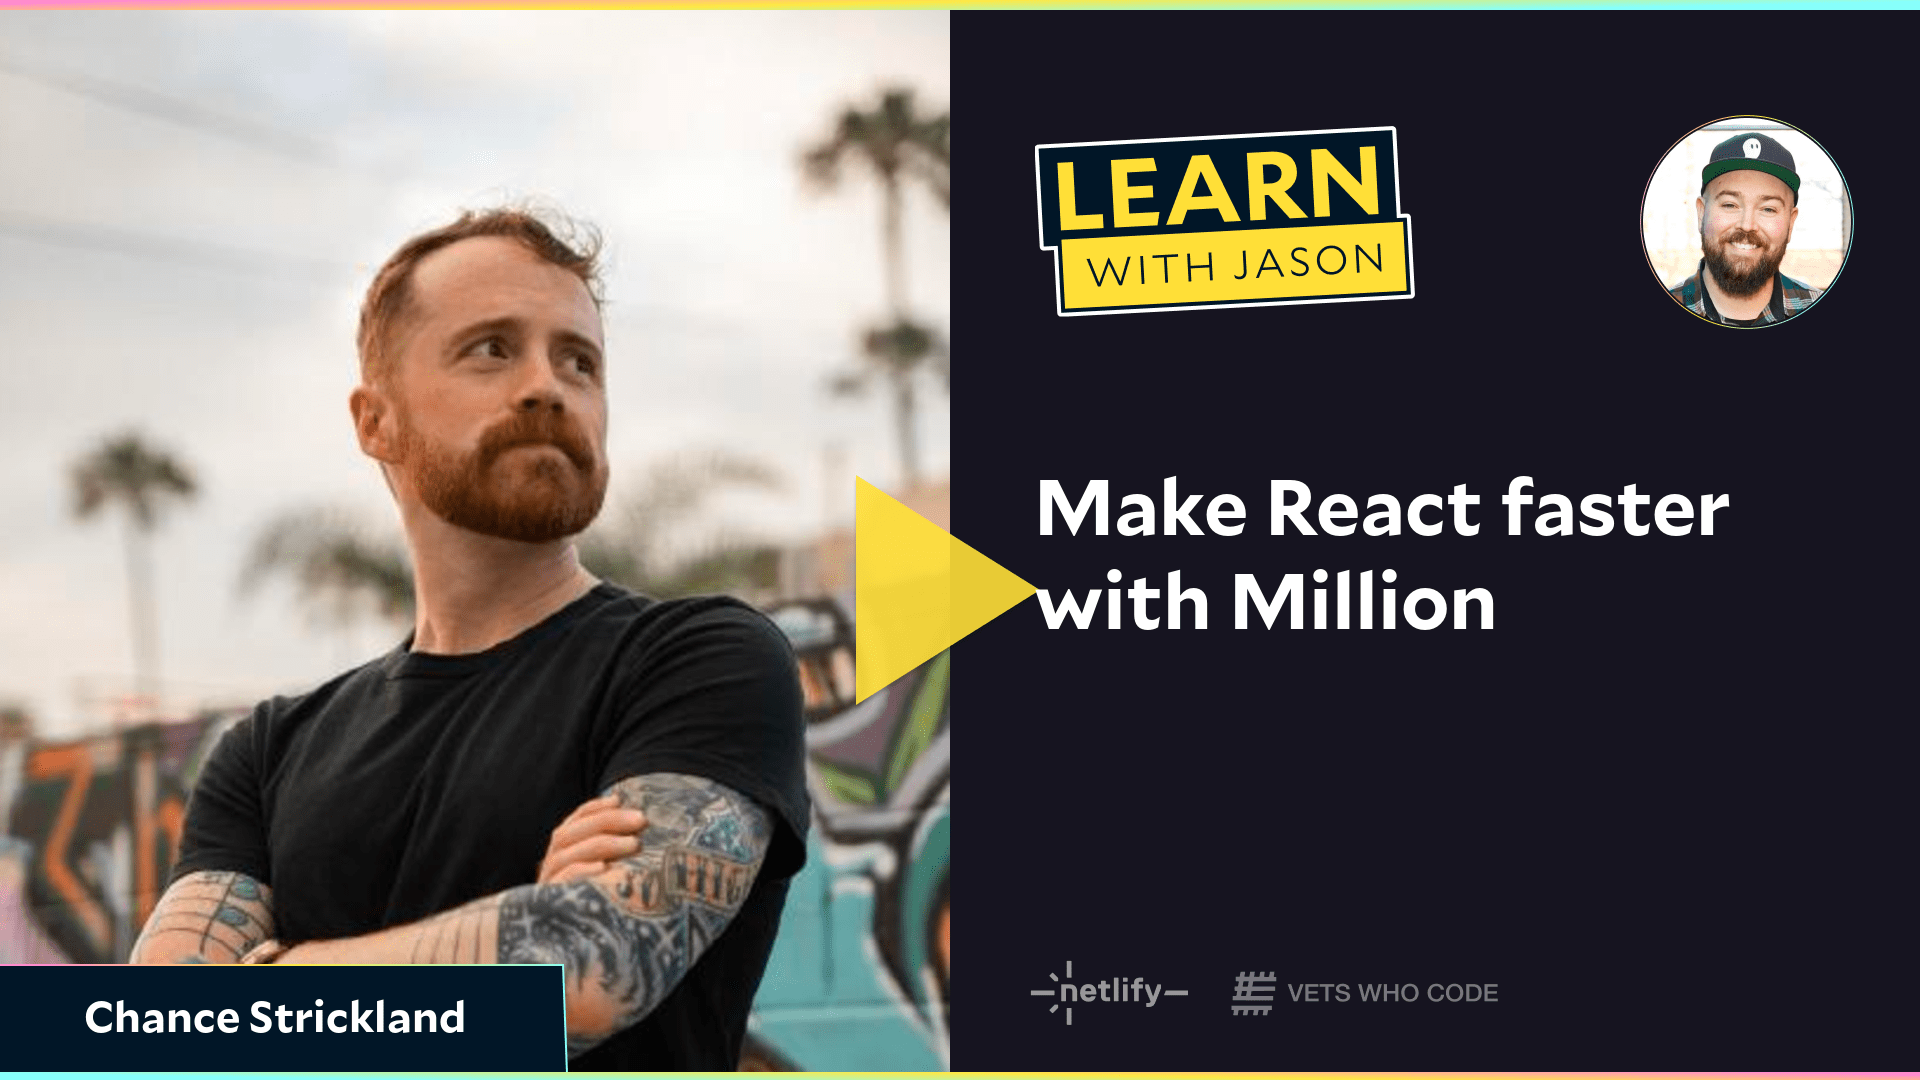 Make React faster with Million (with Chance Strickland)